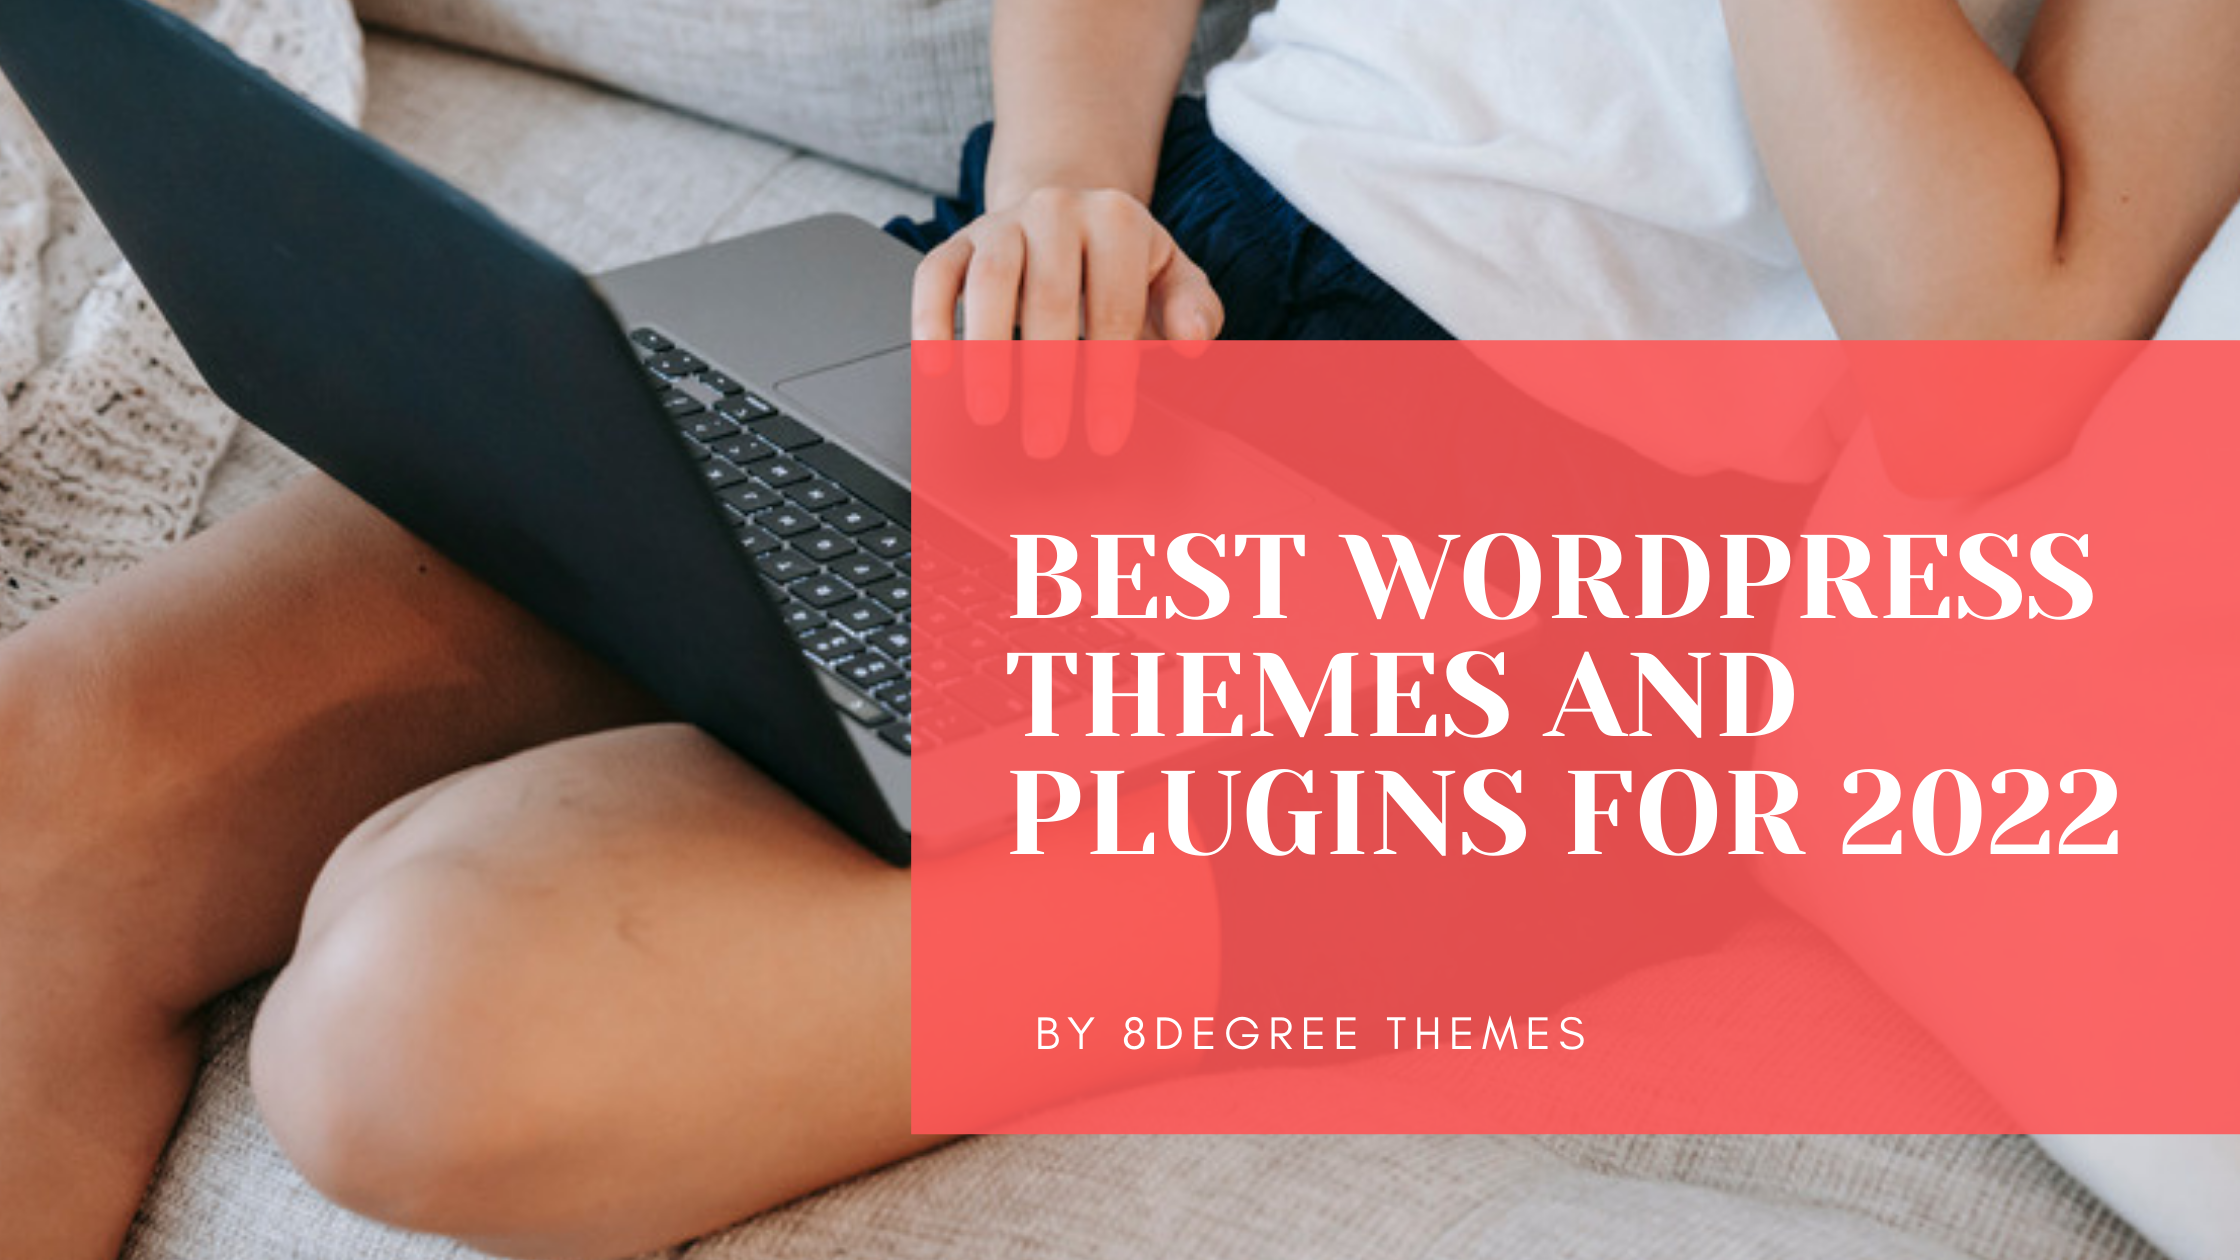 Best WordPress Themes And Plugins For 2022